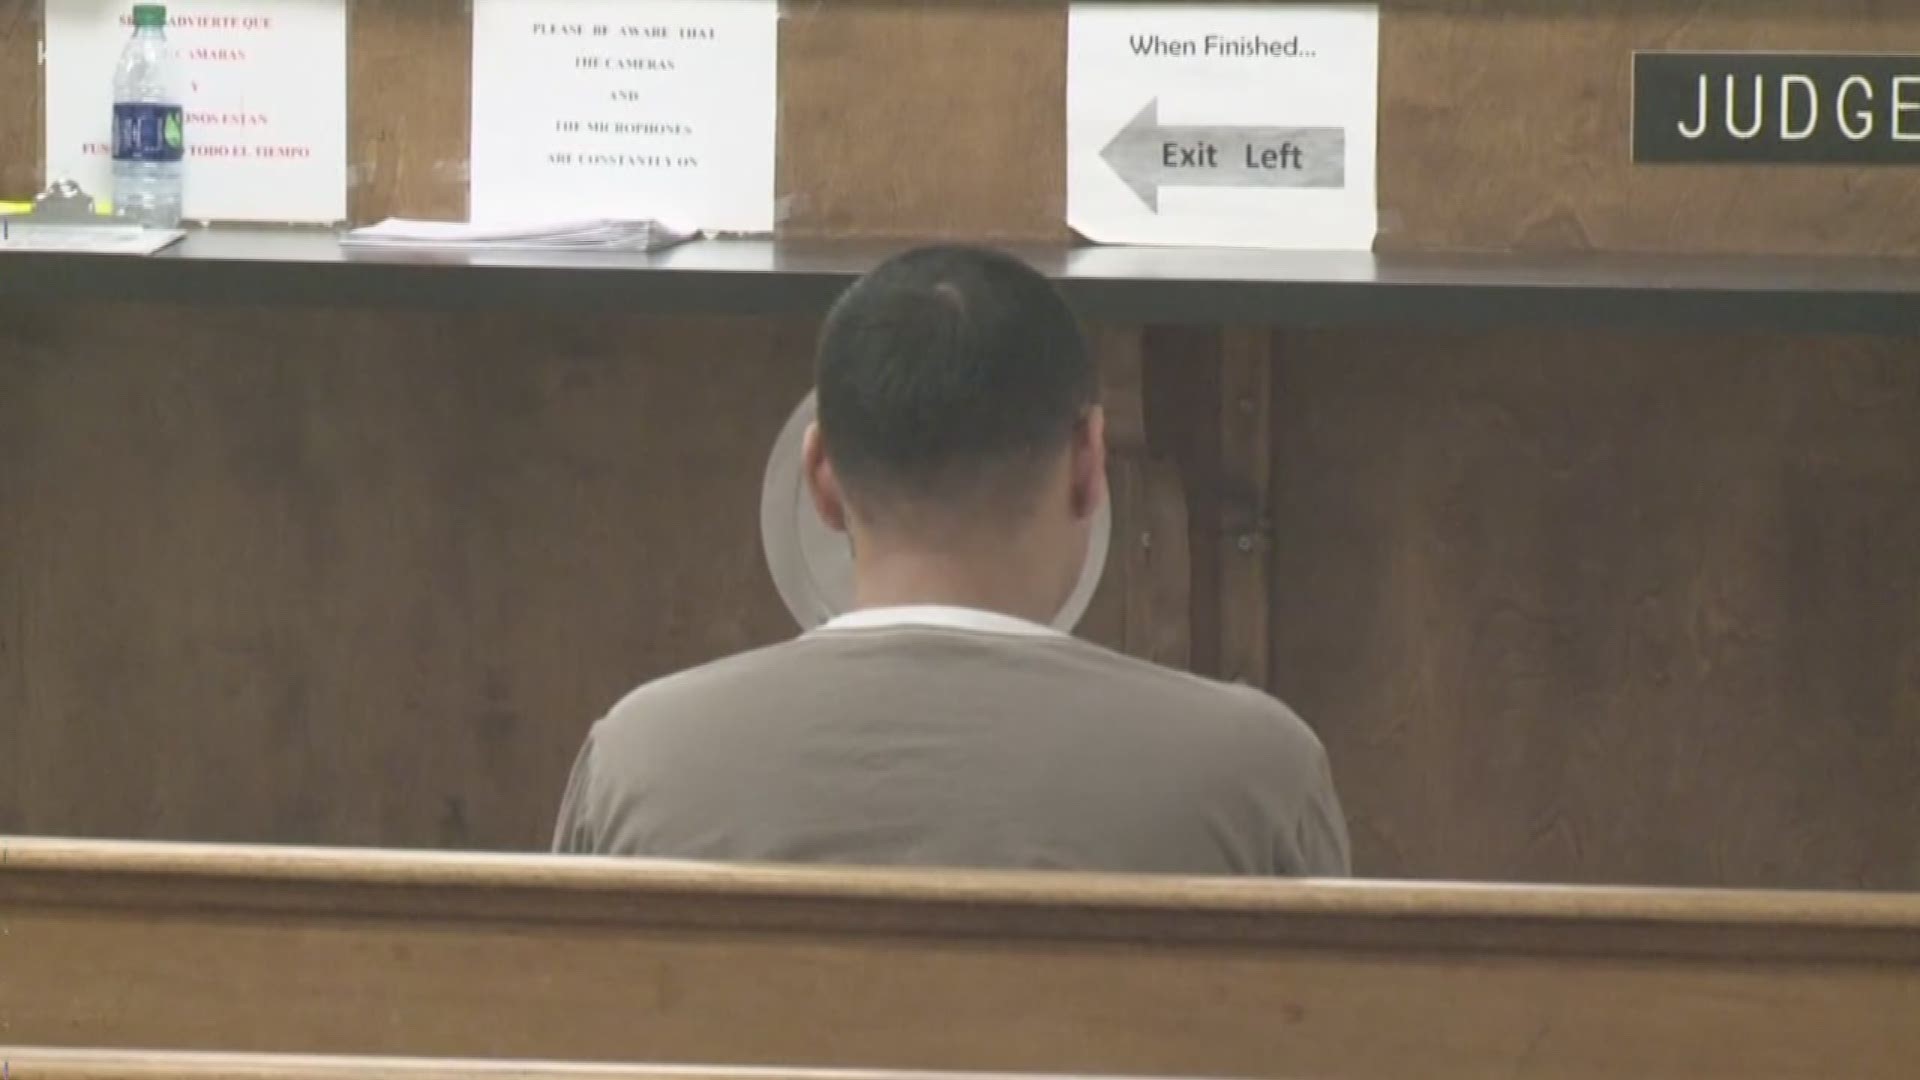 The man accused of raping several women he met on dating apps made his first court appearance before a judge overnight.